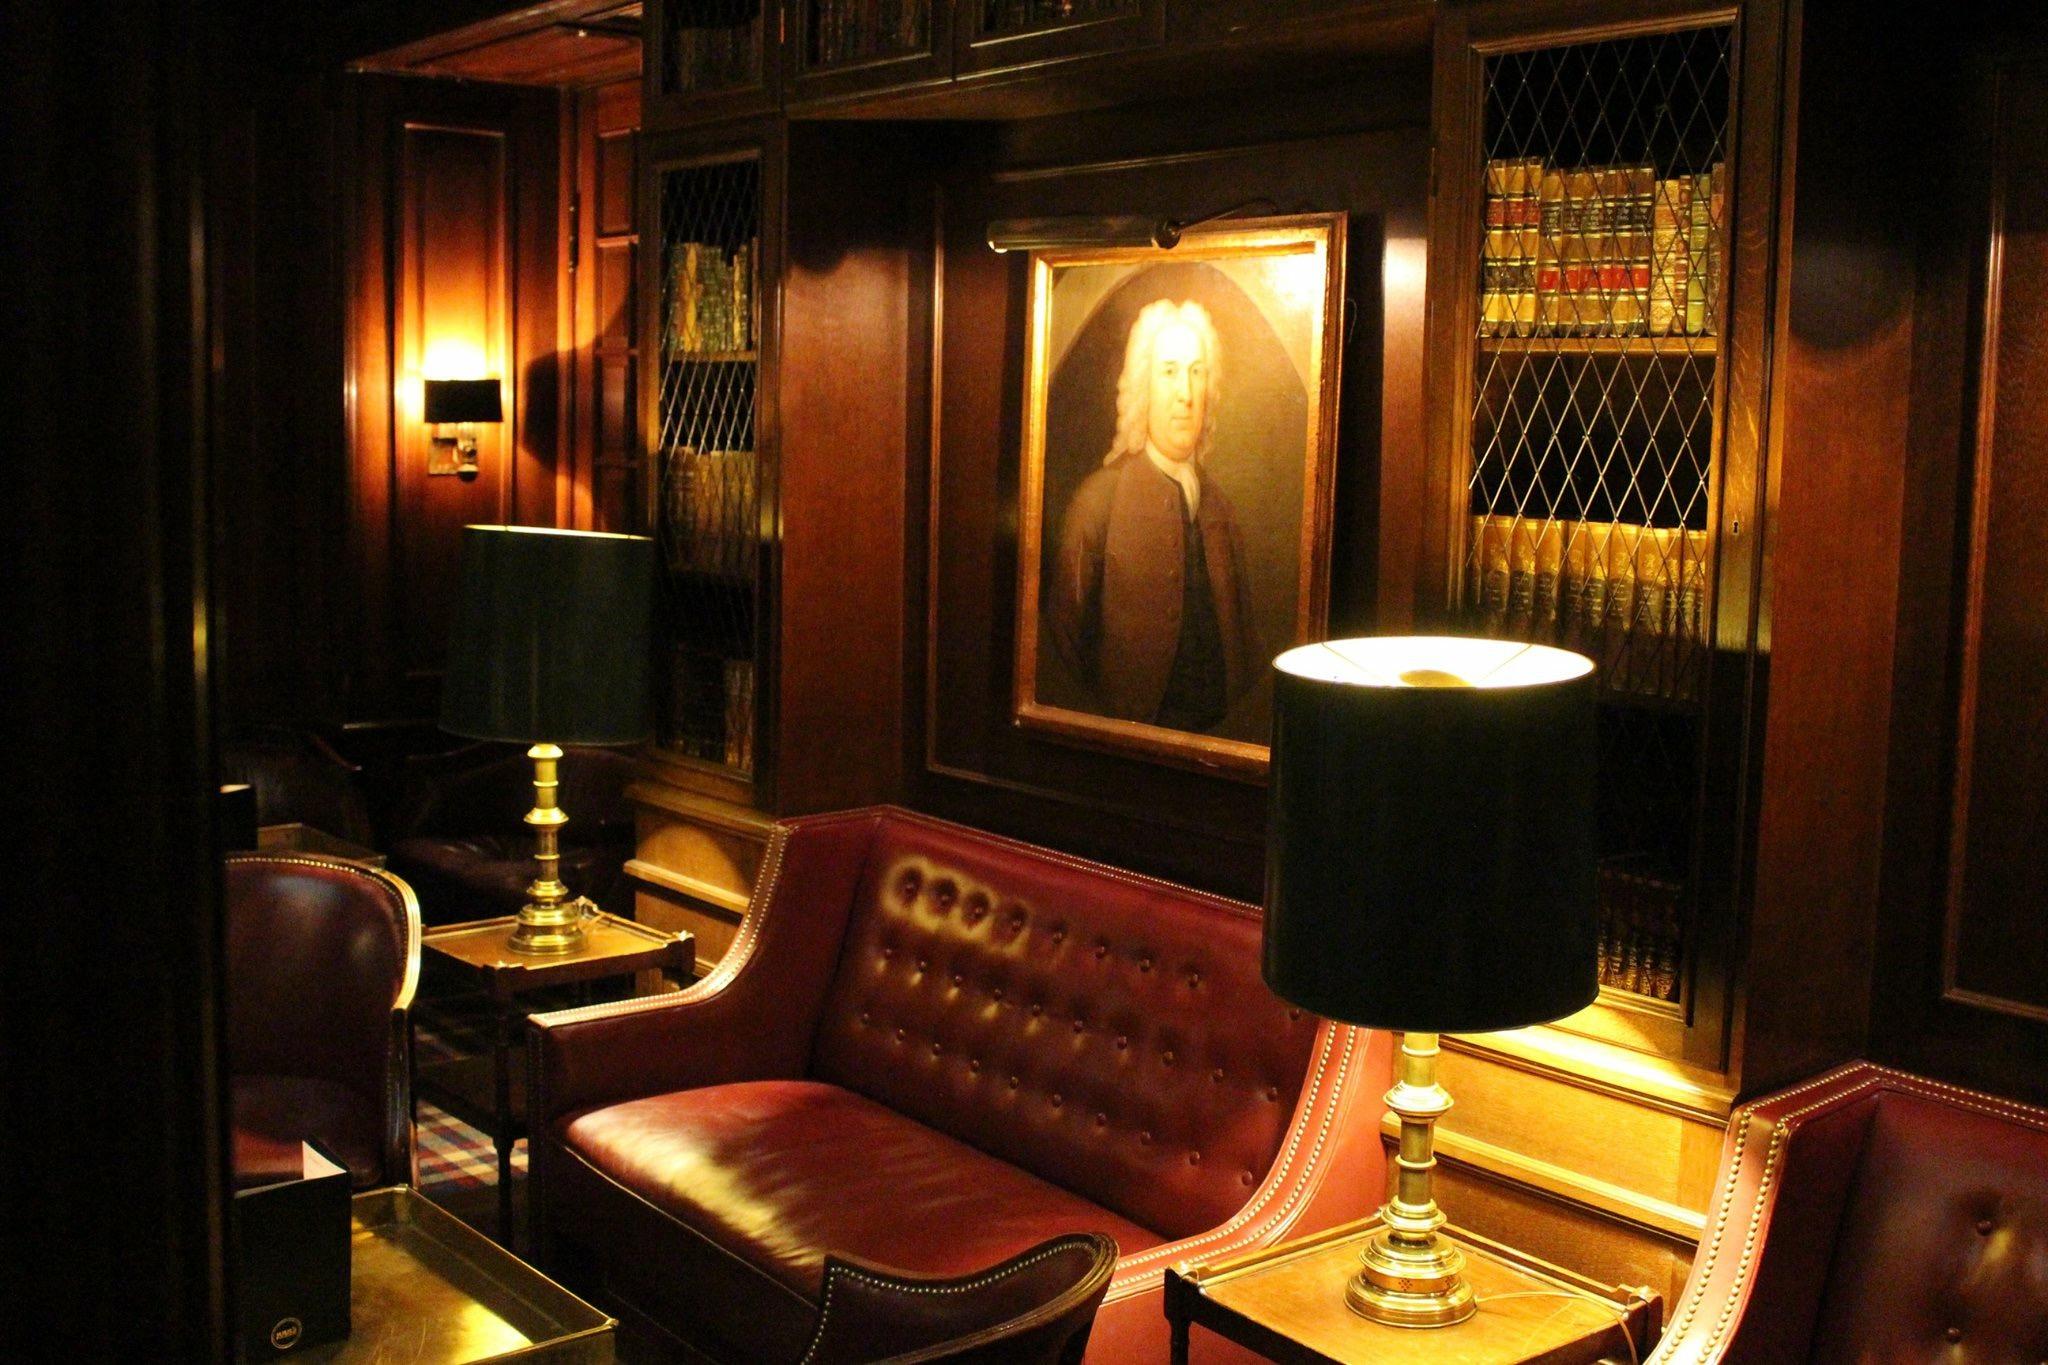 Cover image of this place Library Bar